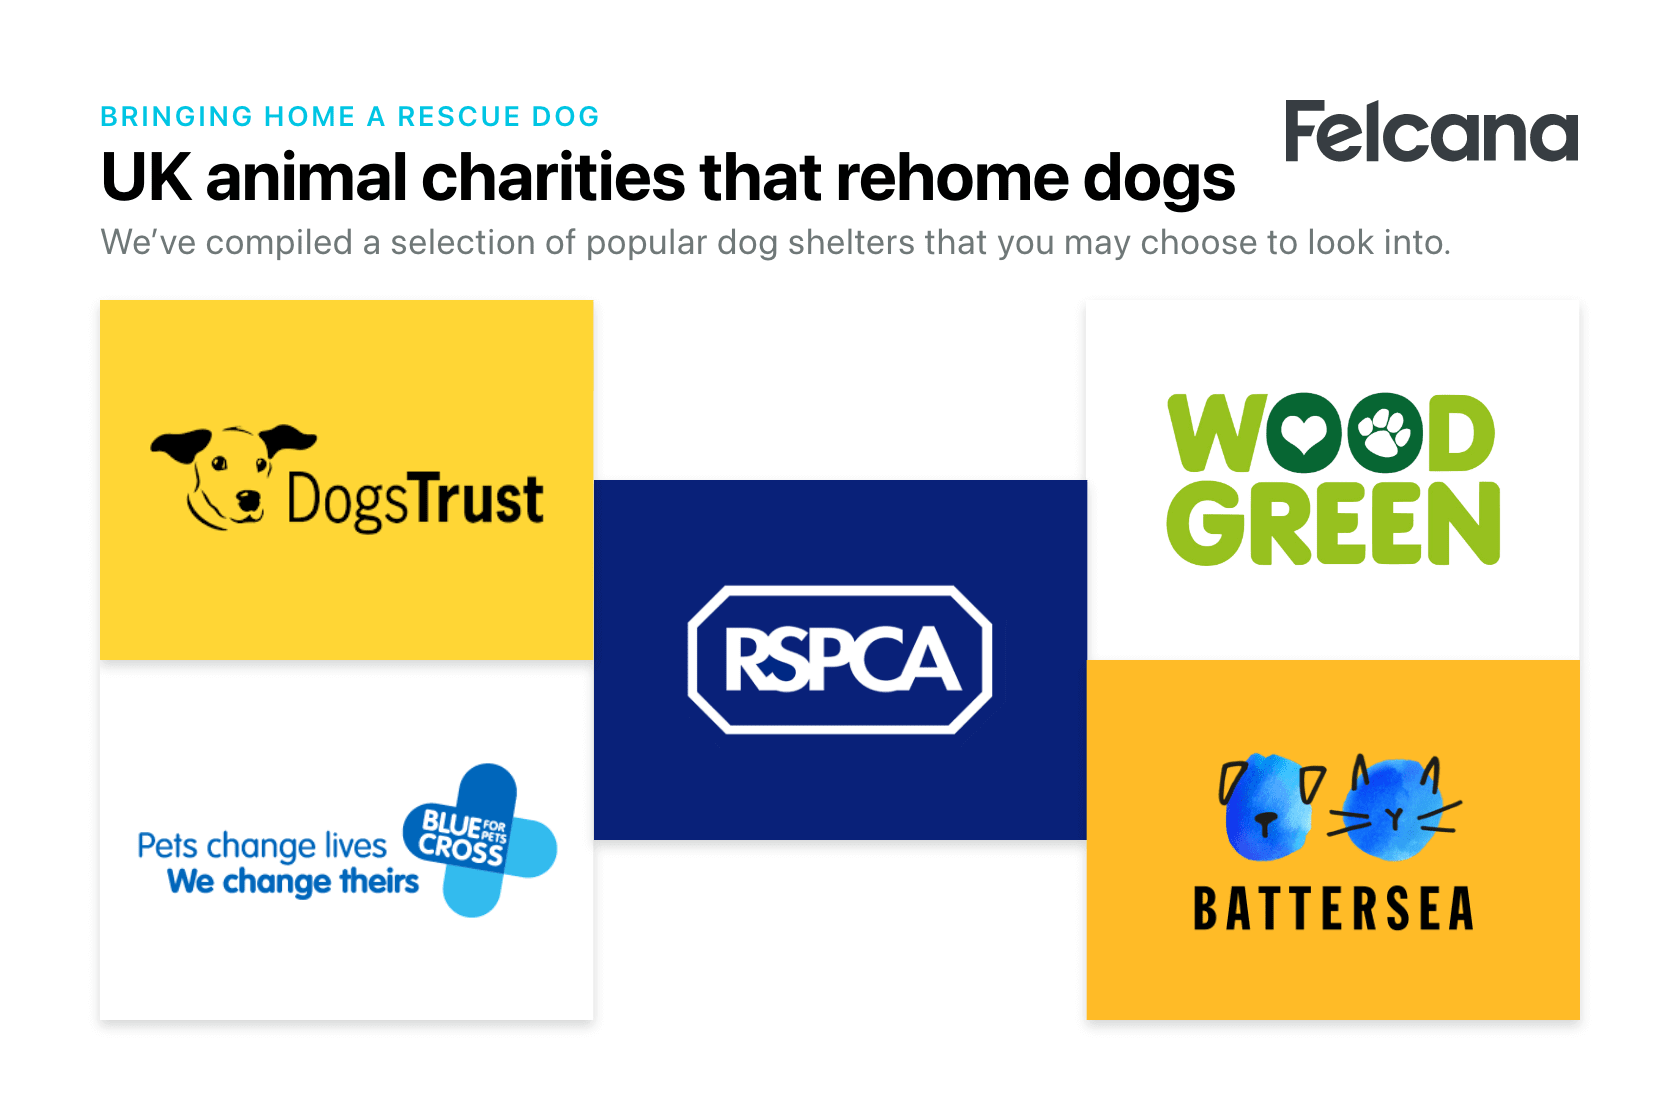 Compilation of popular dog shelters that rehome dogs